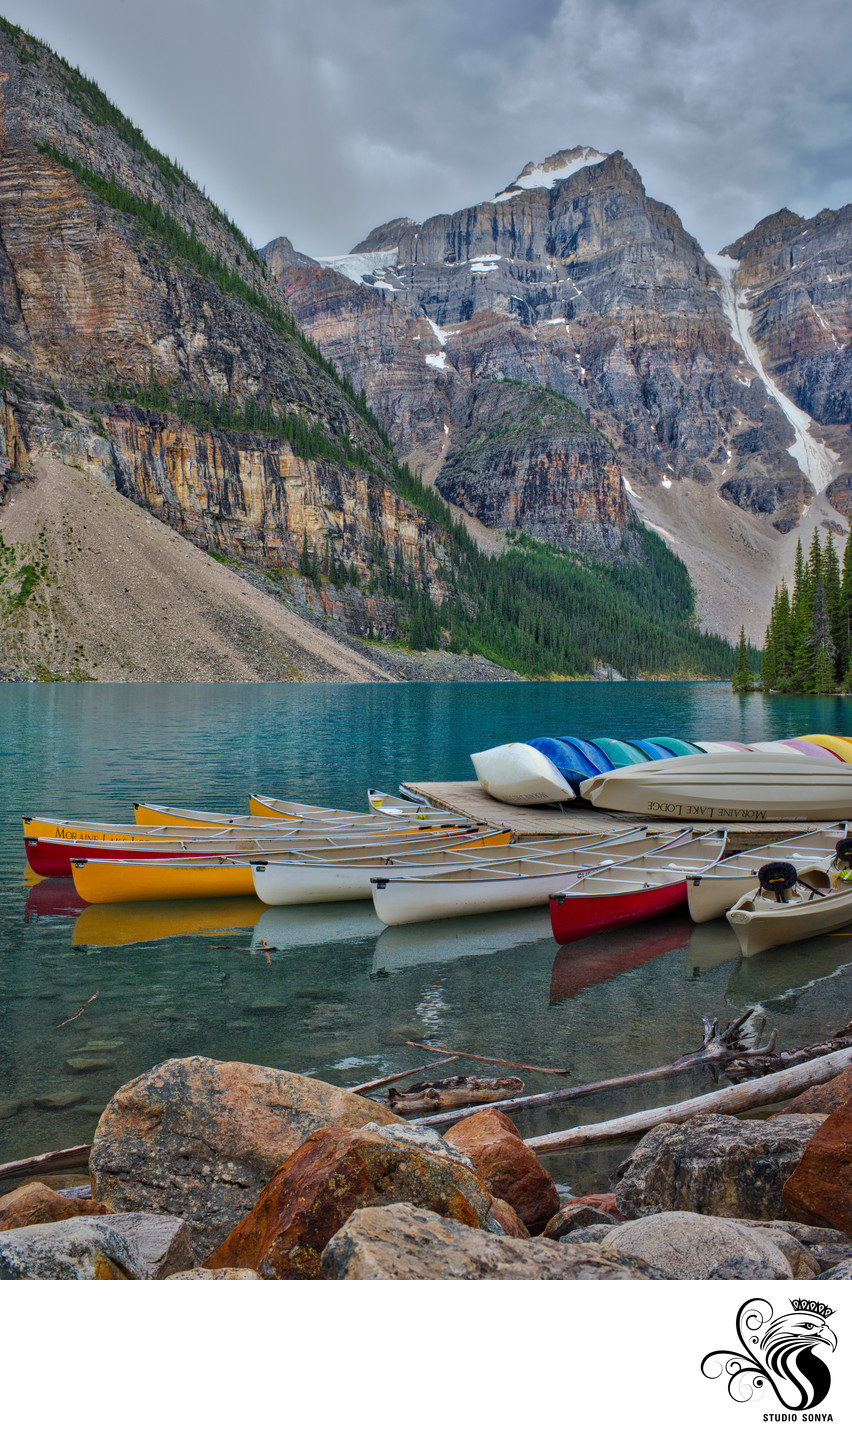 Canoes Resting on the Dock at Moraine Lake